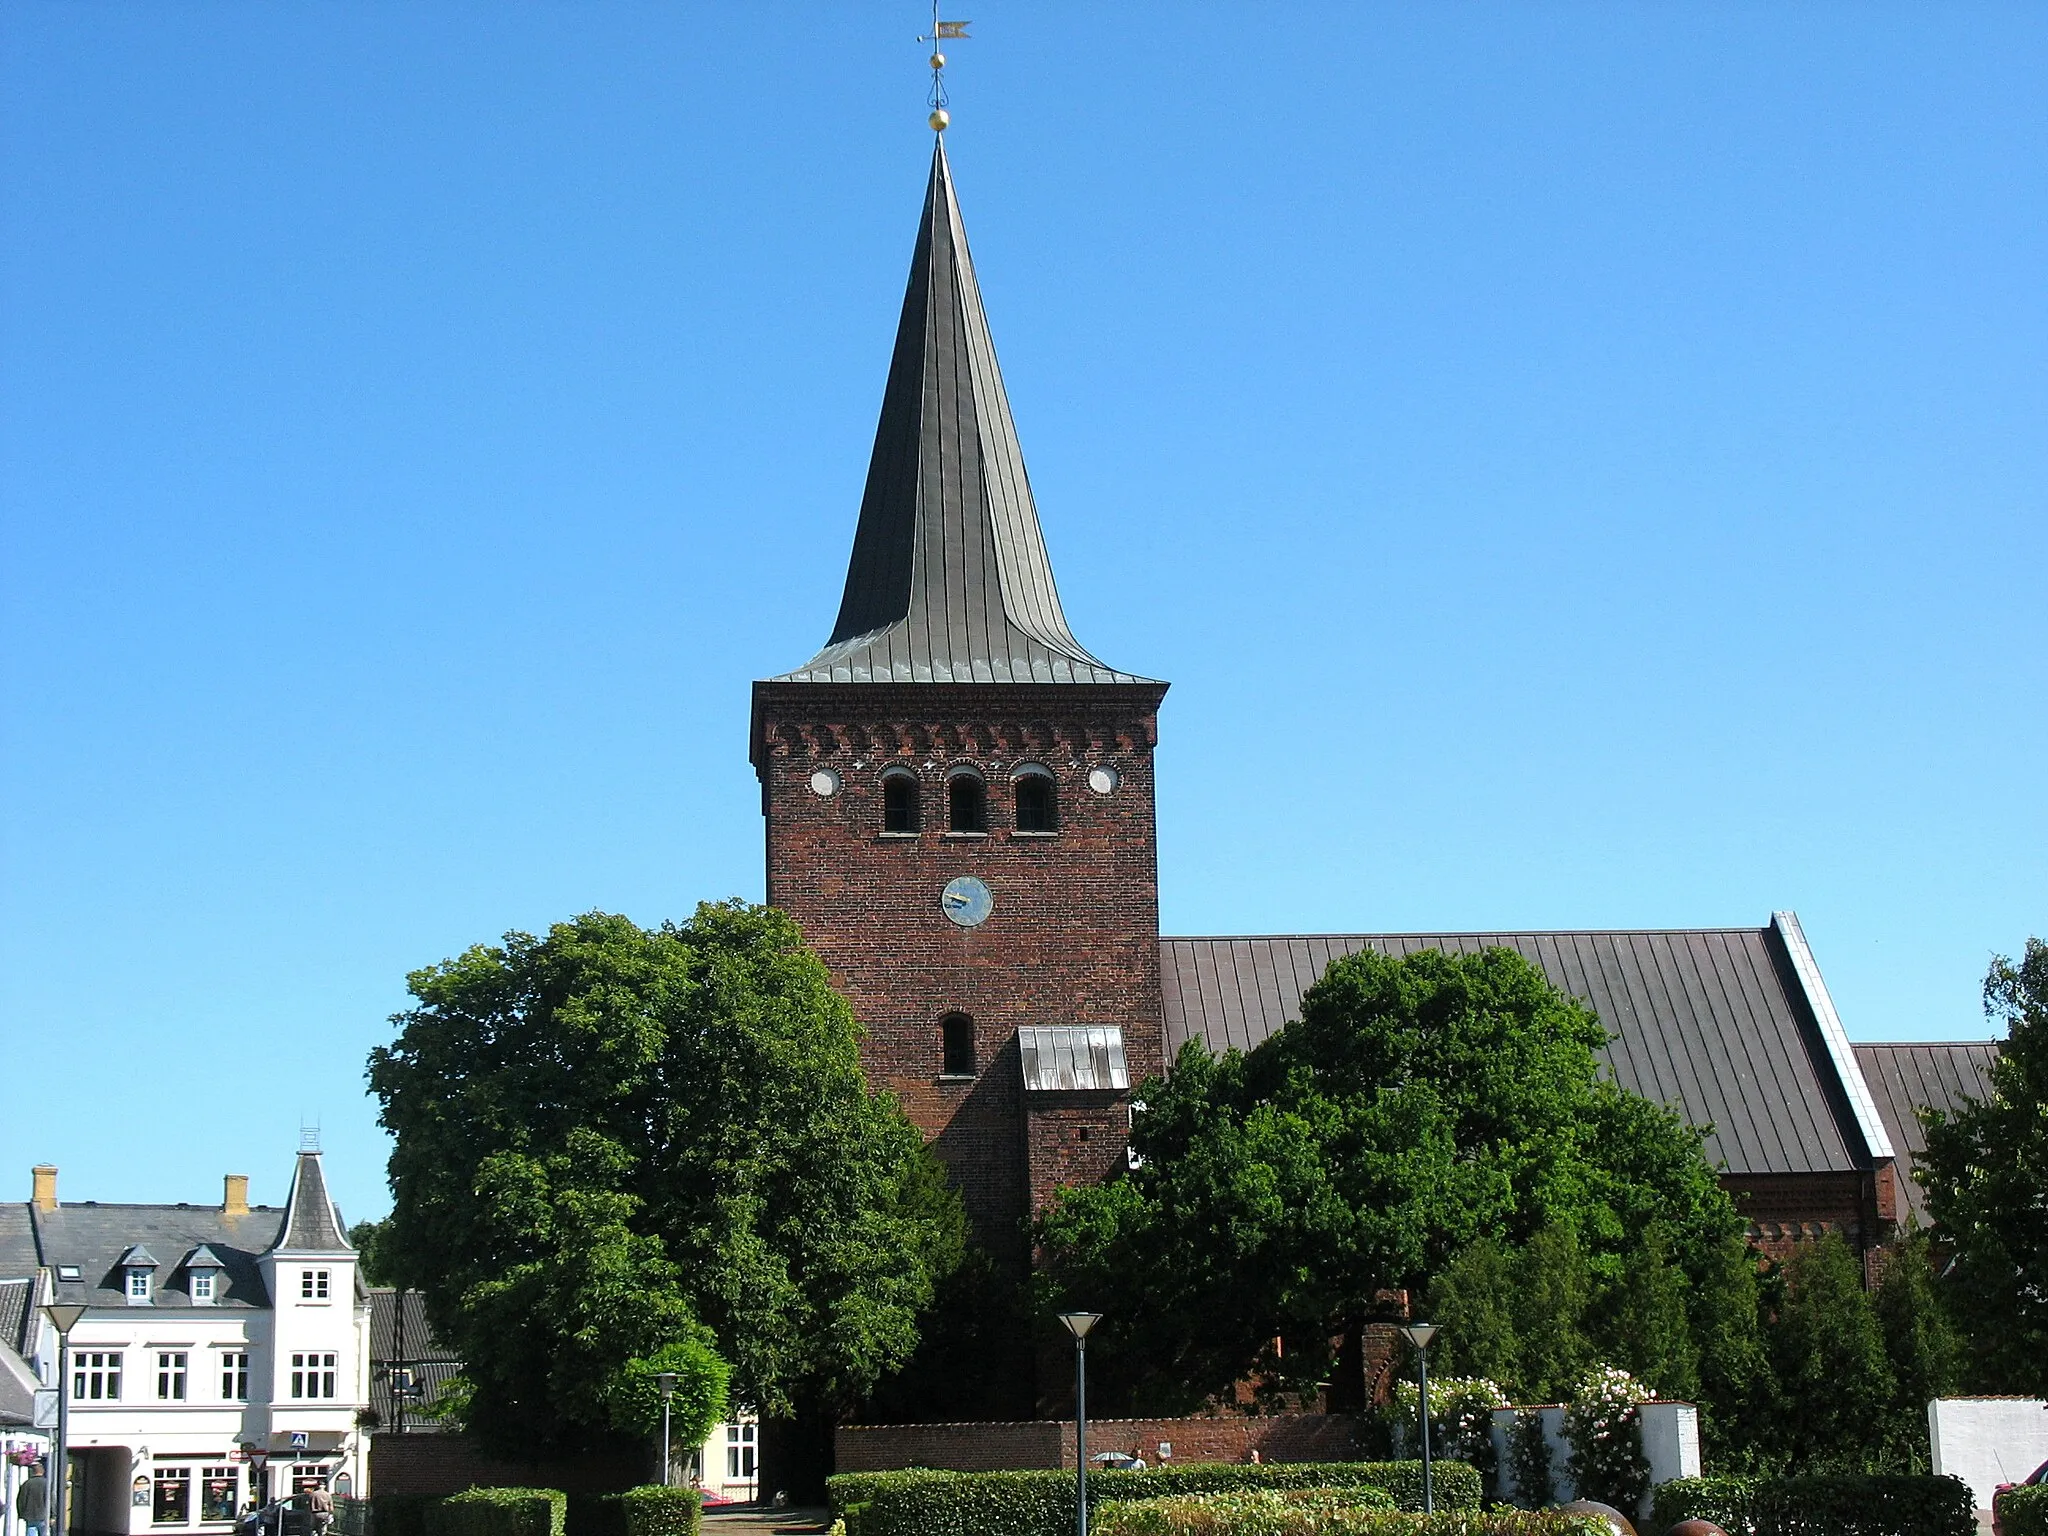 Photo showing: The church "Sakskøbing Kirke" in the small town "Sakskøbing". The town is located on the island Lolland in east Denmark.